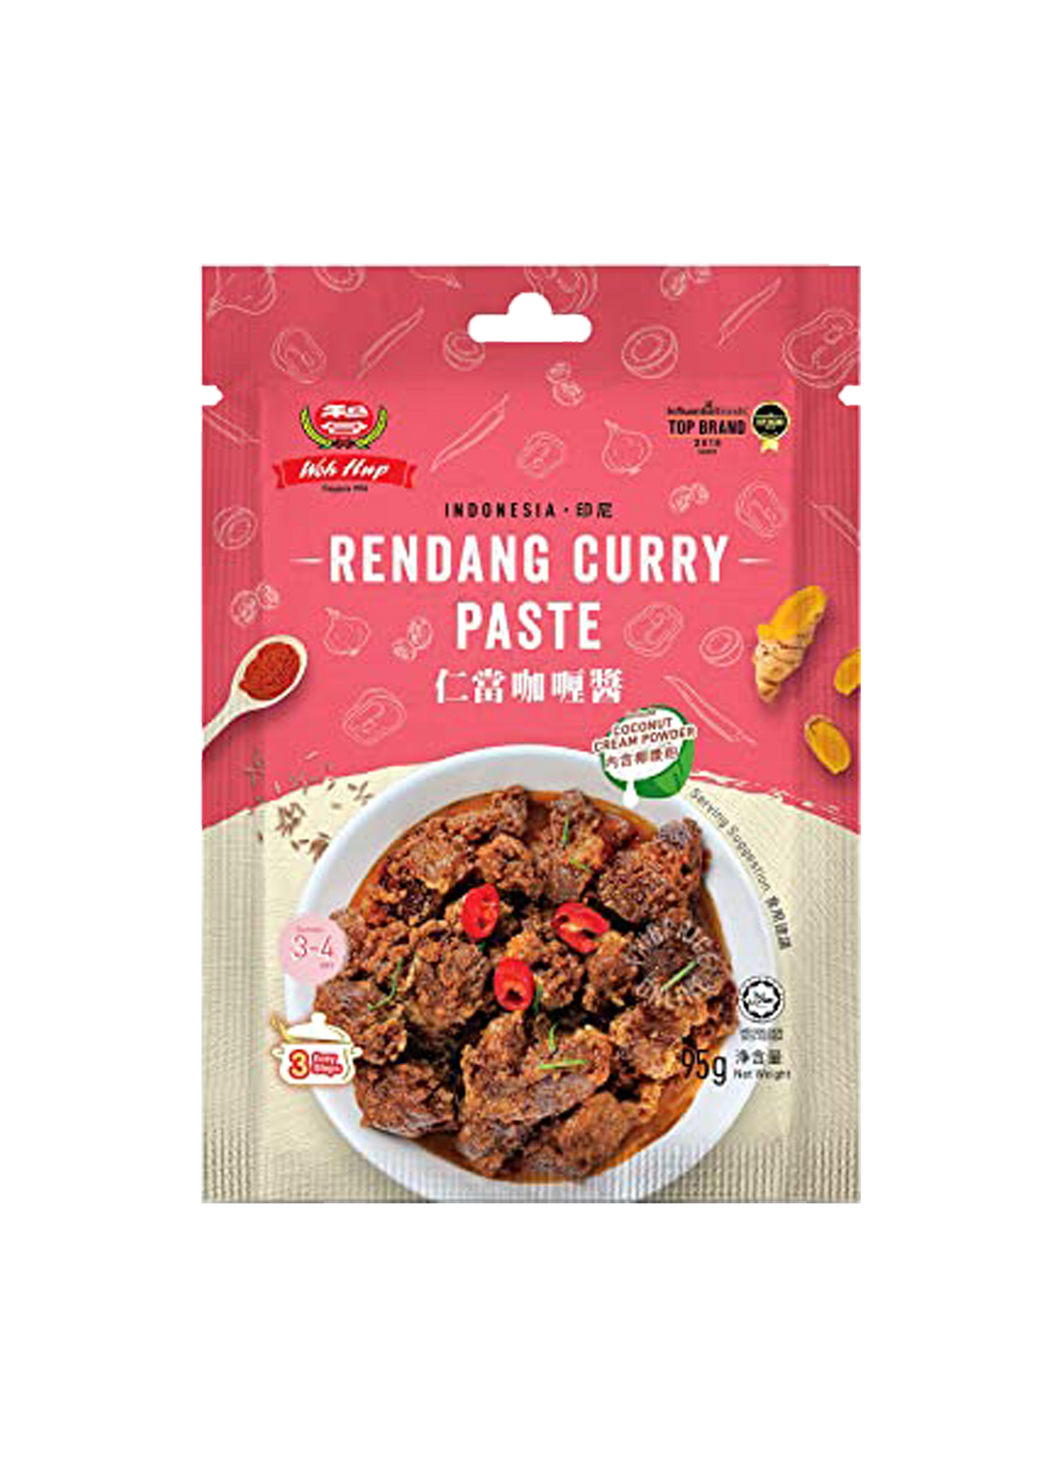 Wuh Hup Indonesia Rendang Curry Paste 95g